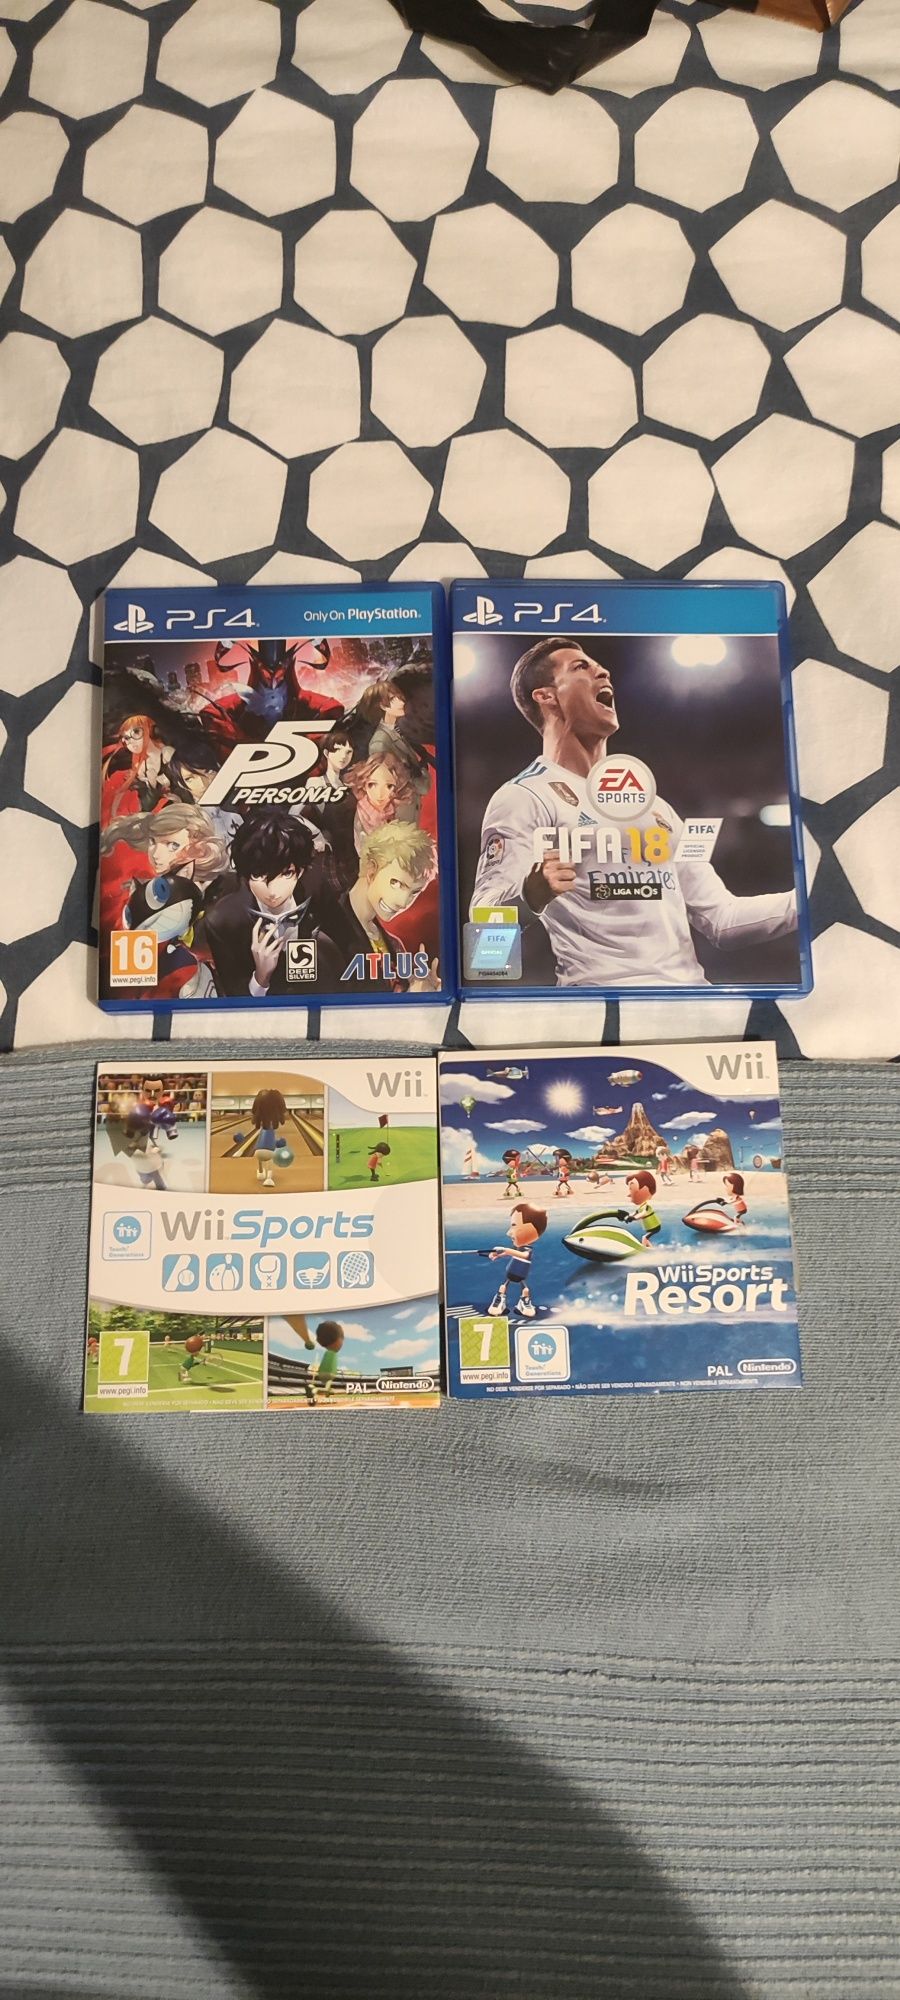 jogos PS4/Wii/NDS/PSP